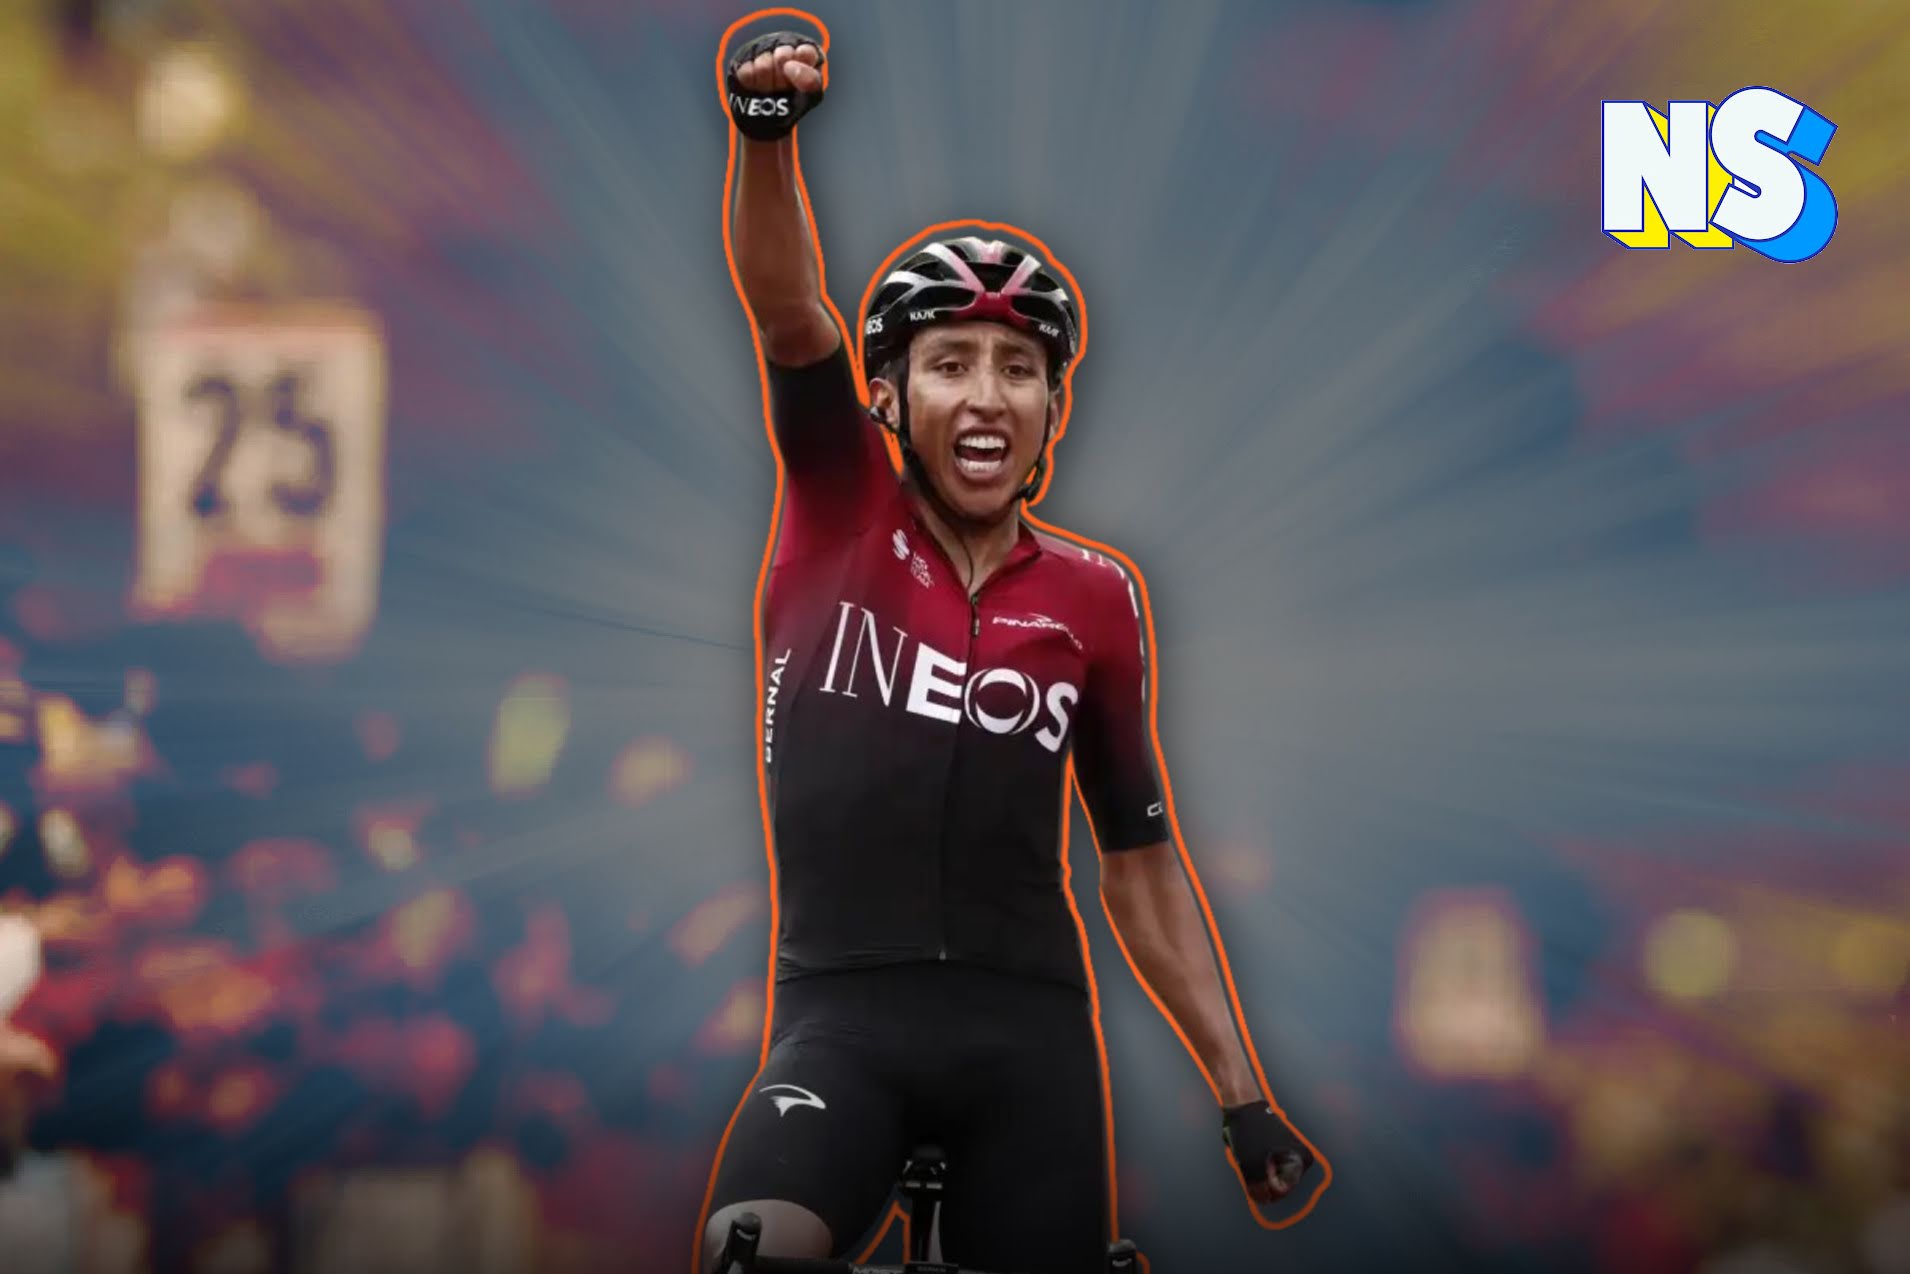 A Latino Made History at the Tour de France nuestro stories